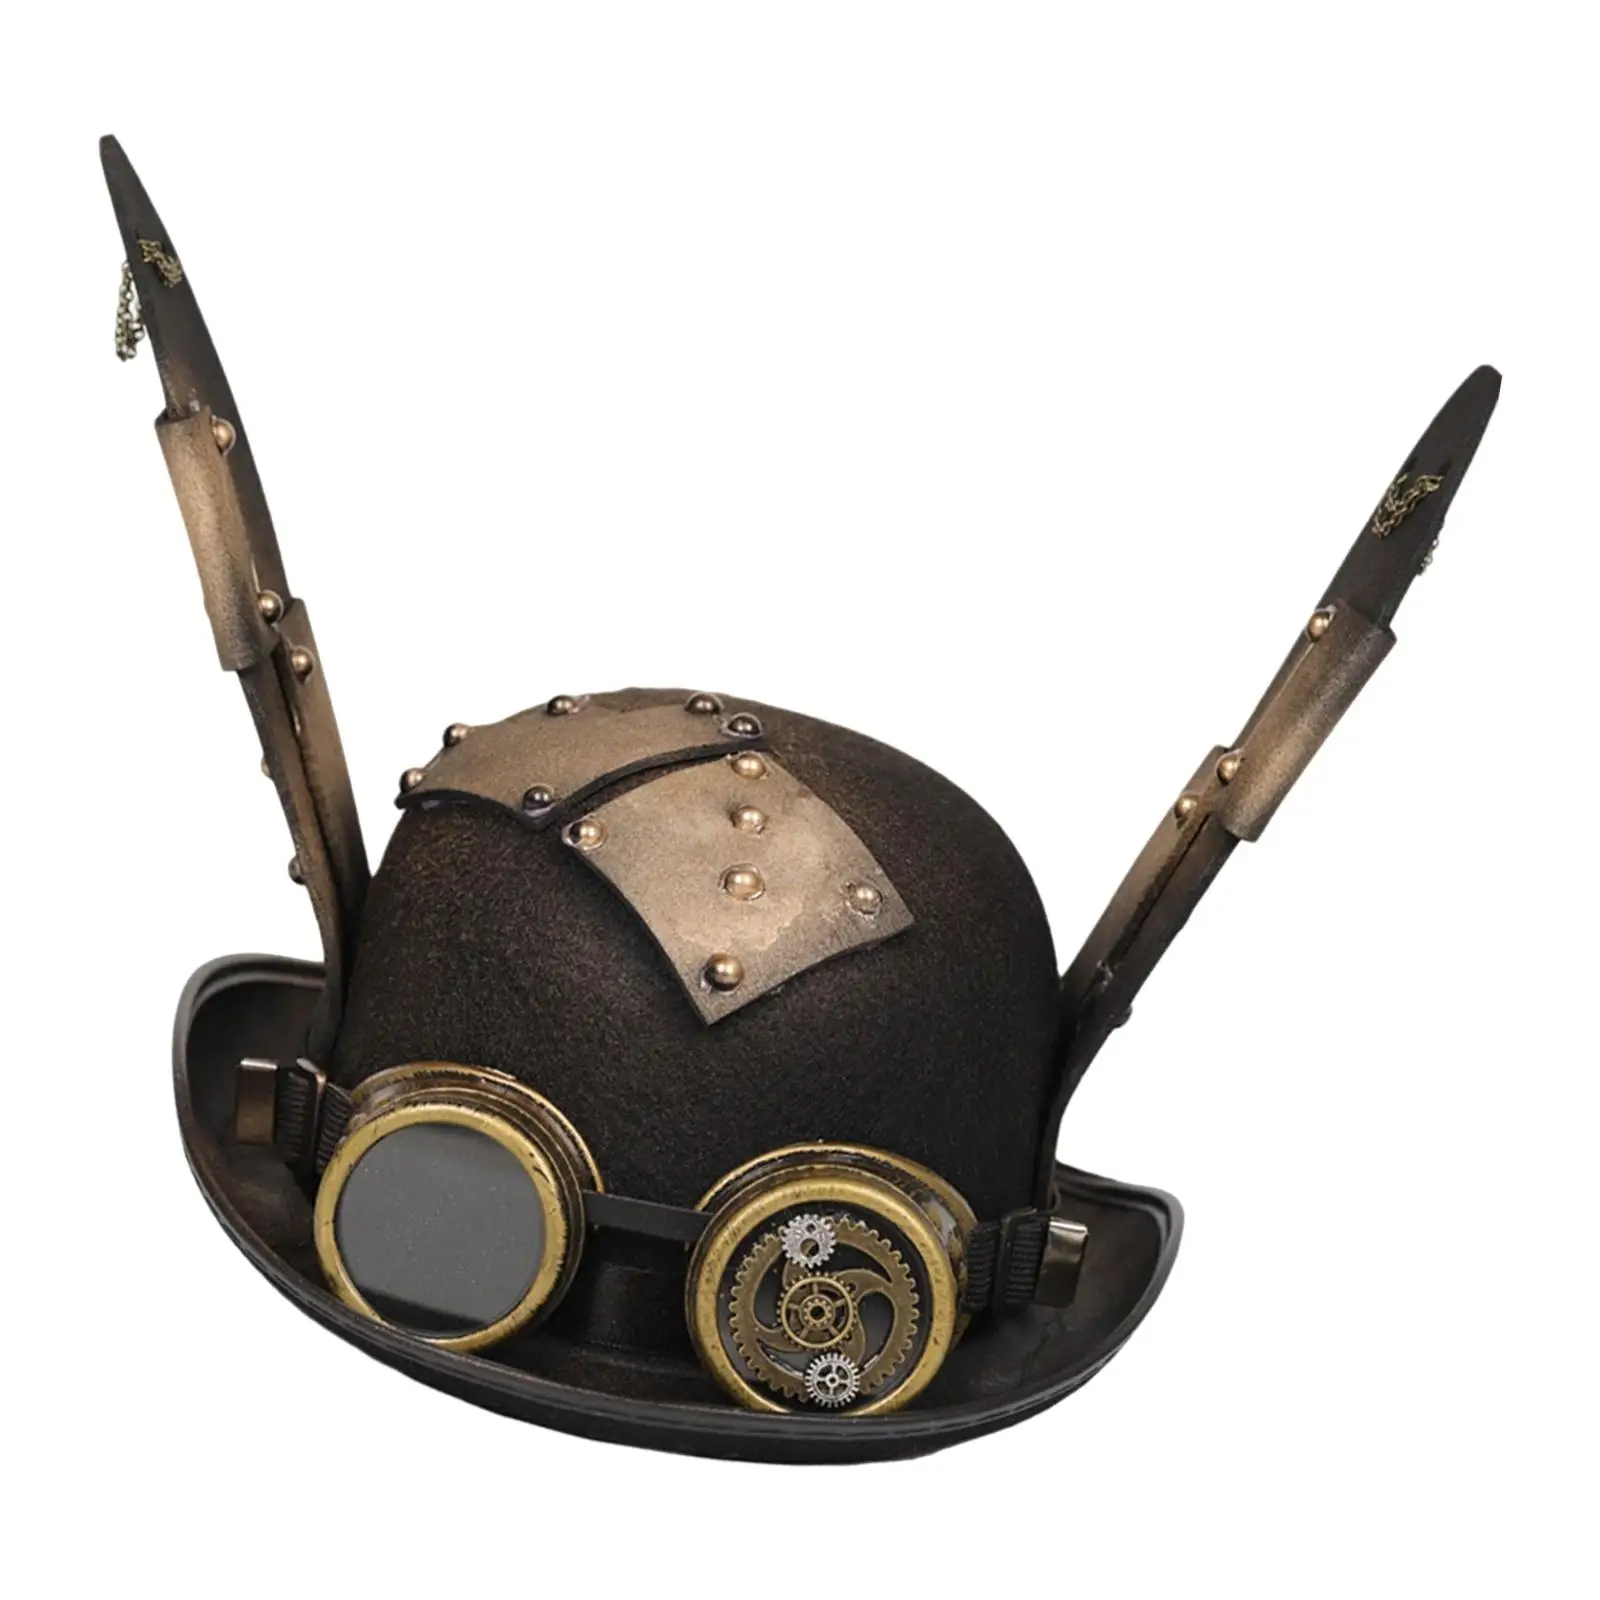 Elegant Steampunk Goggles Black Top Hat Unisex with Bunny Ears Costume Party Cosplay Costume Retro Steampunk Goggles Glasses